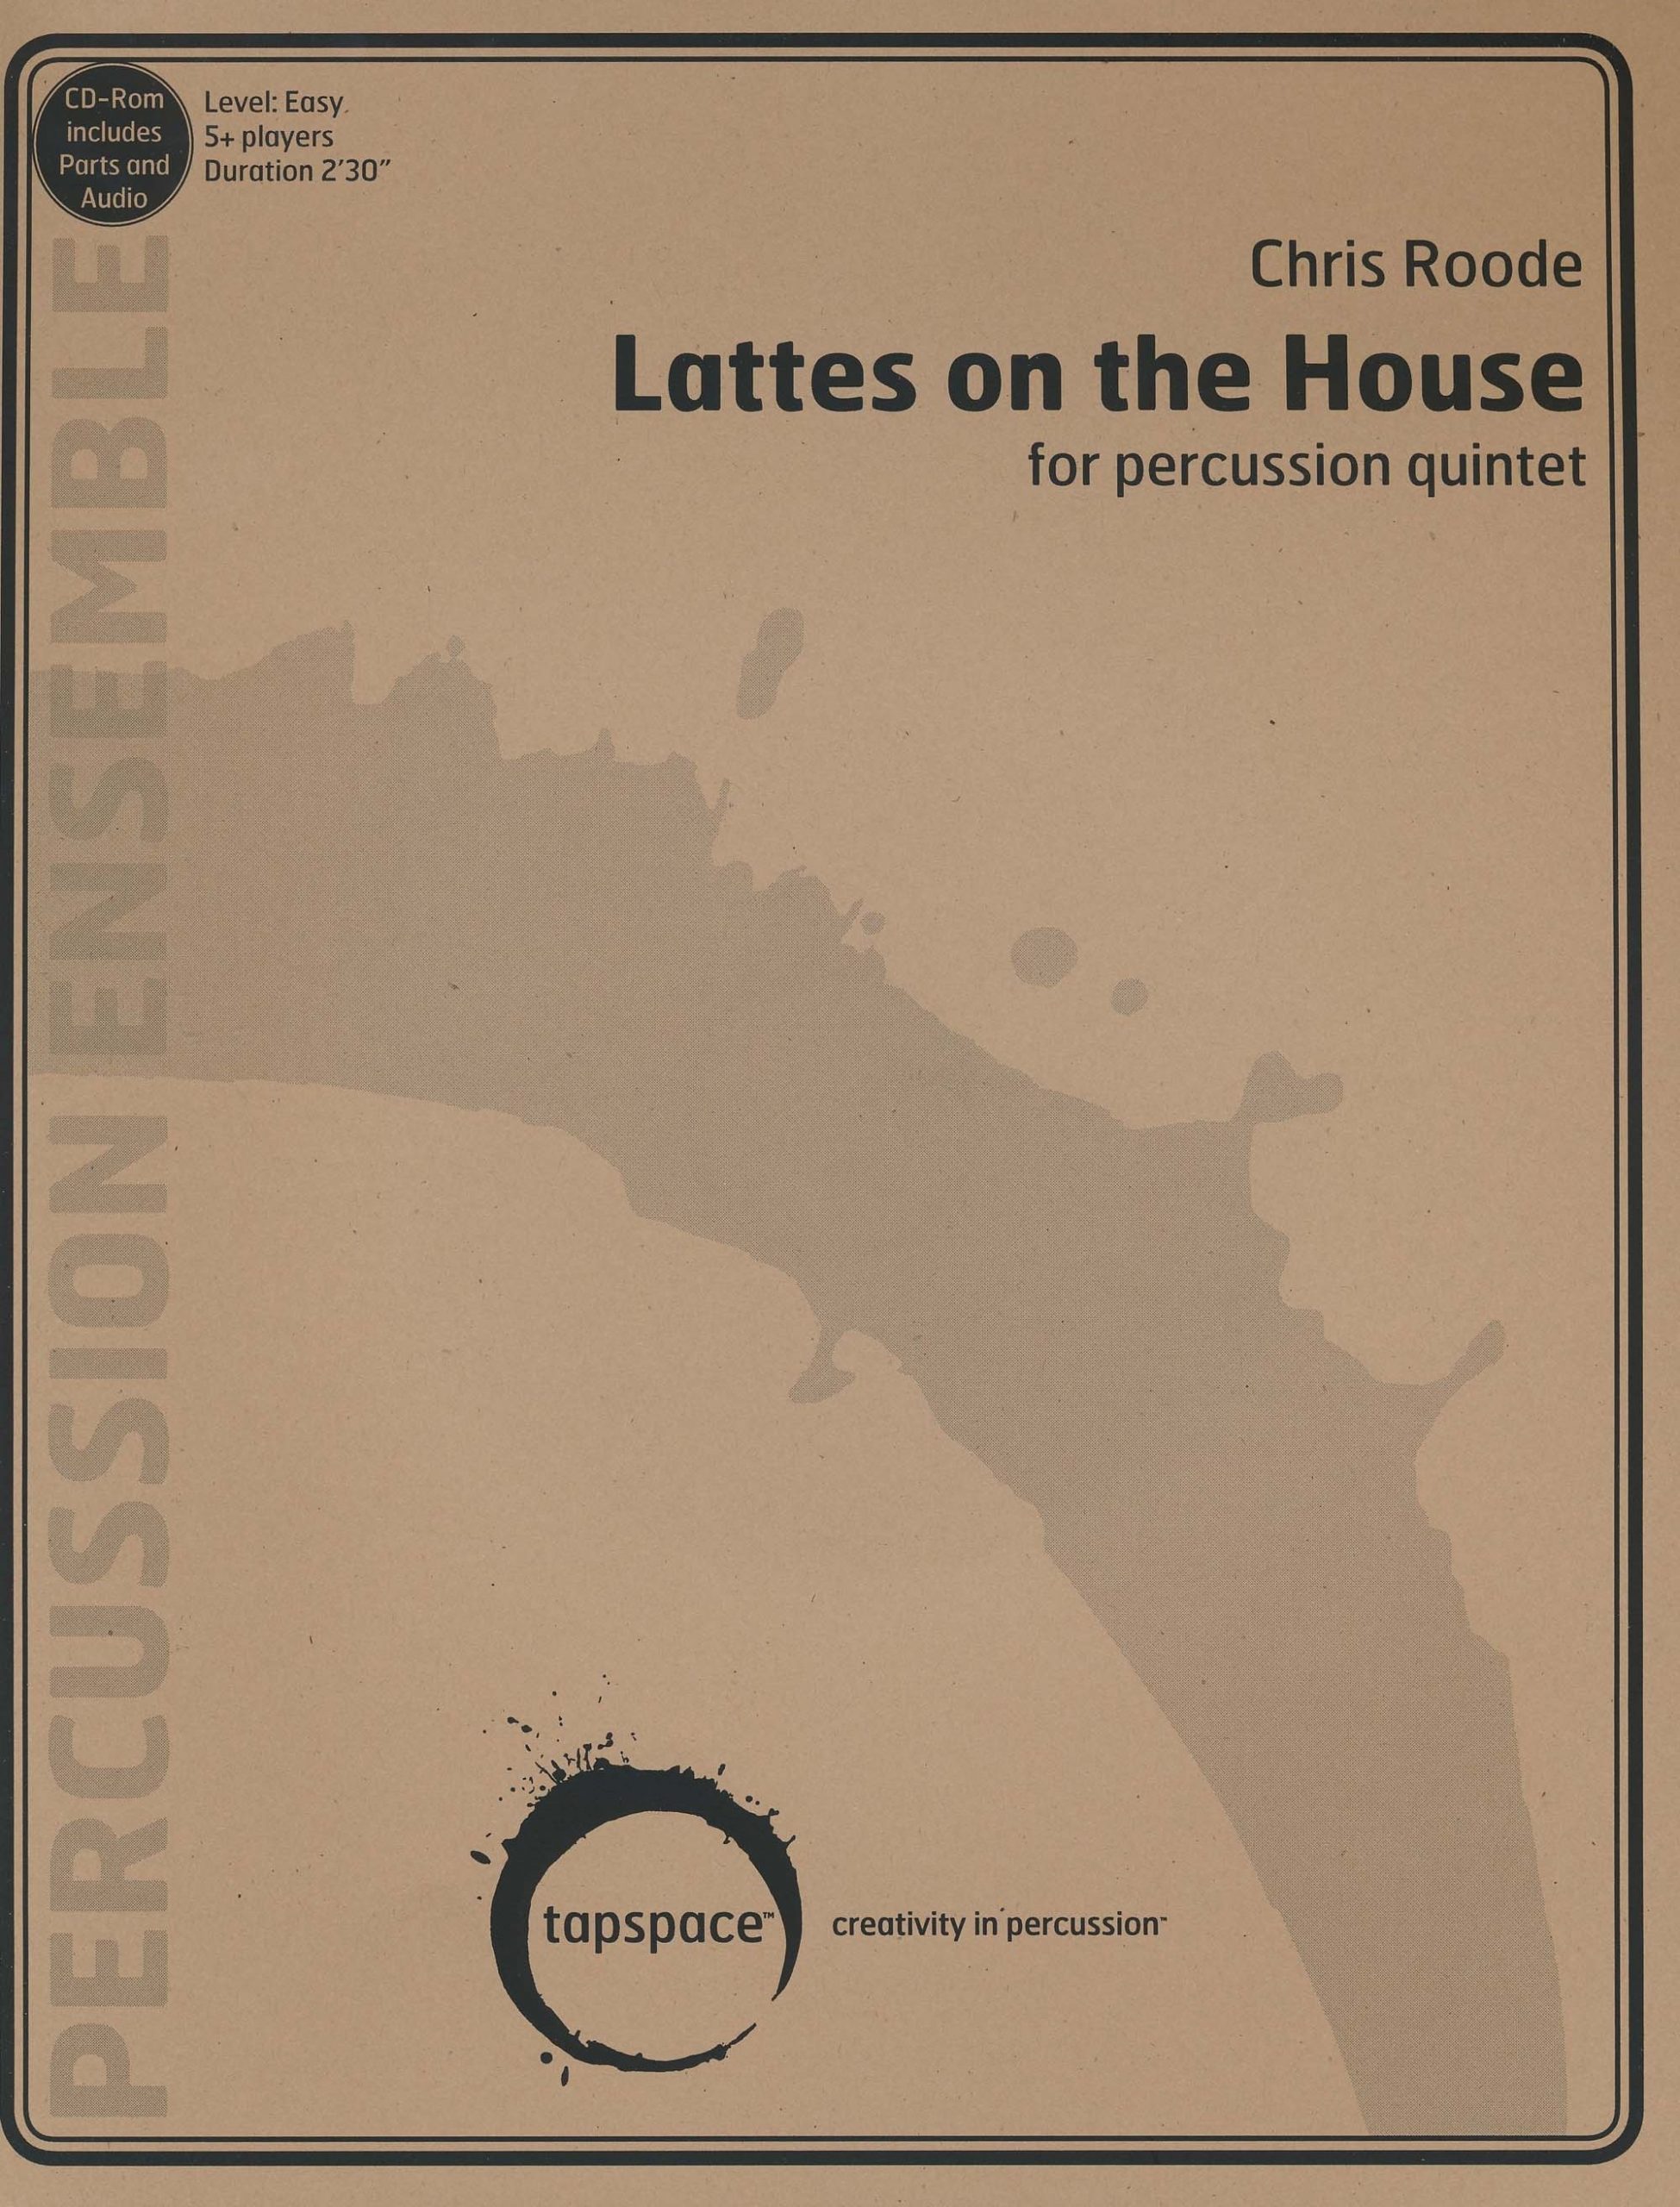 Lattes on the House by Chris Roode